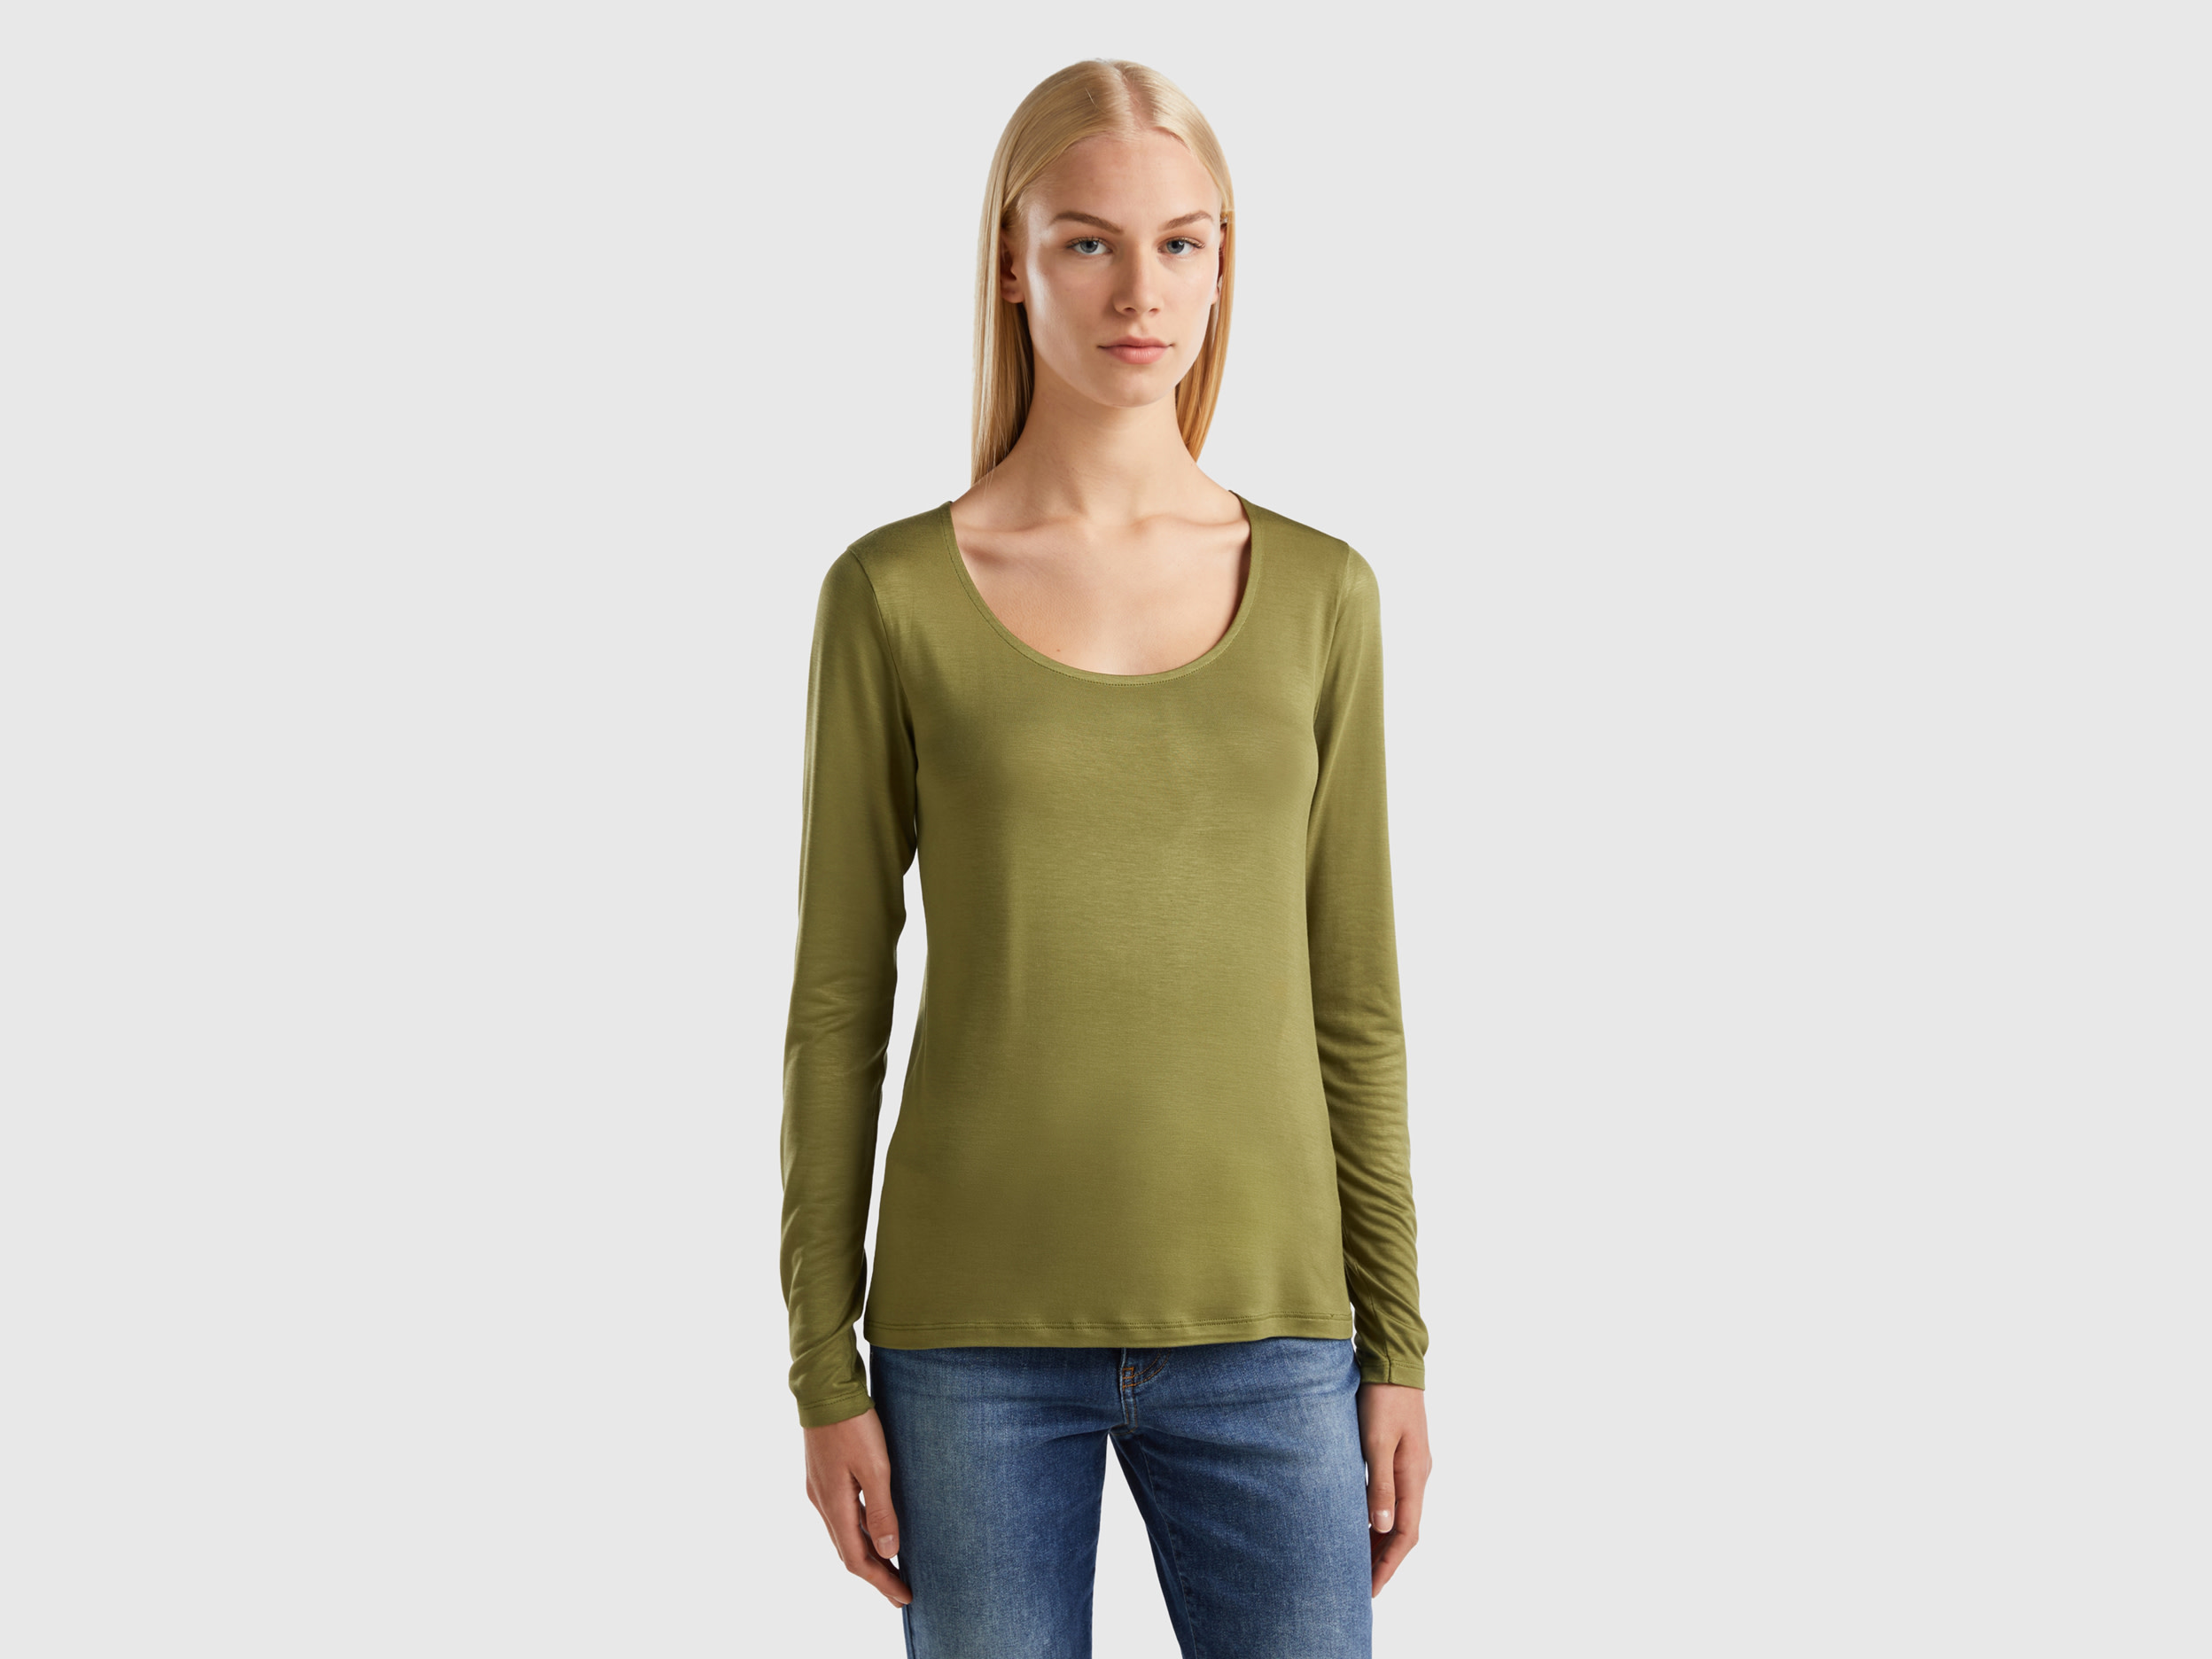 Benetton, T-shirt In Sustainable Stretch Viscose, size M, Military Green, Women